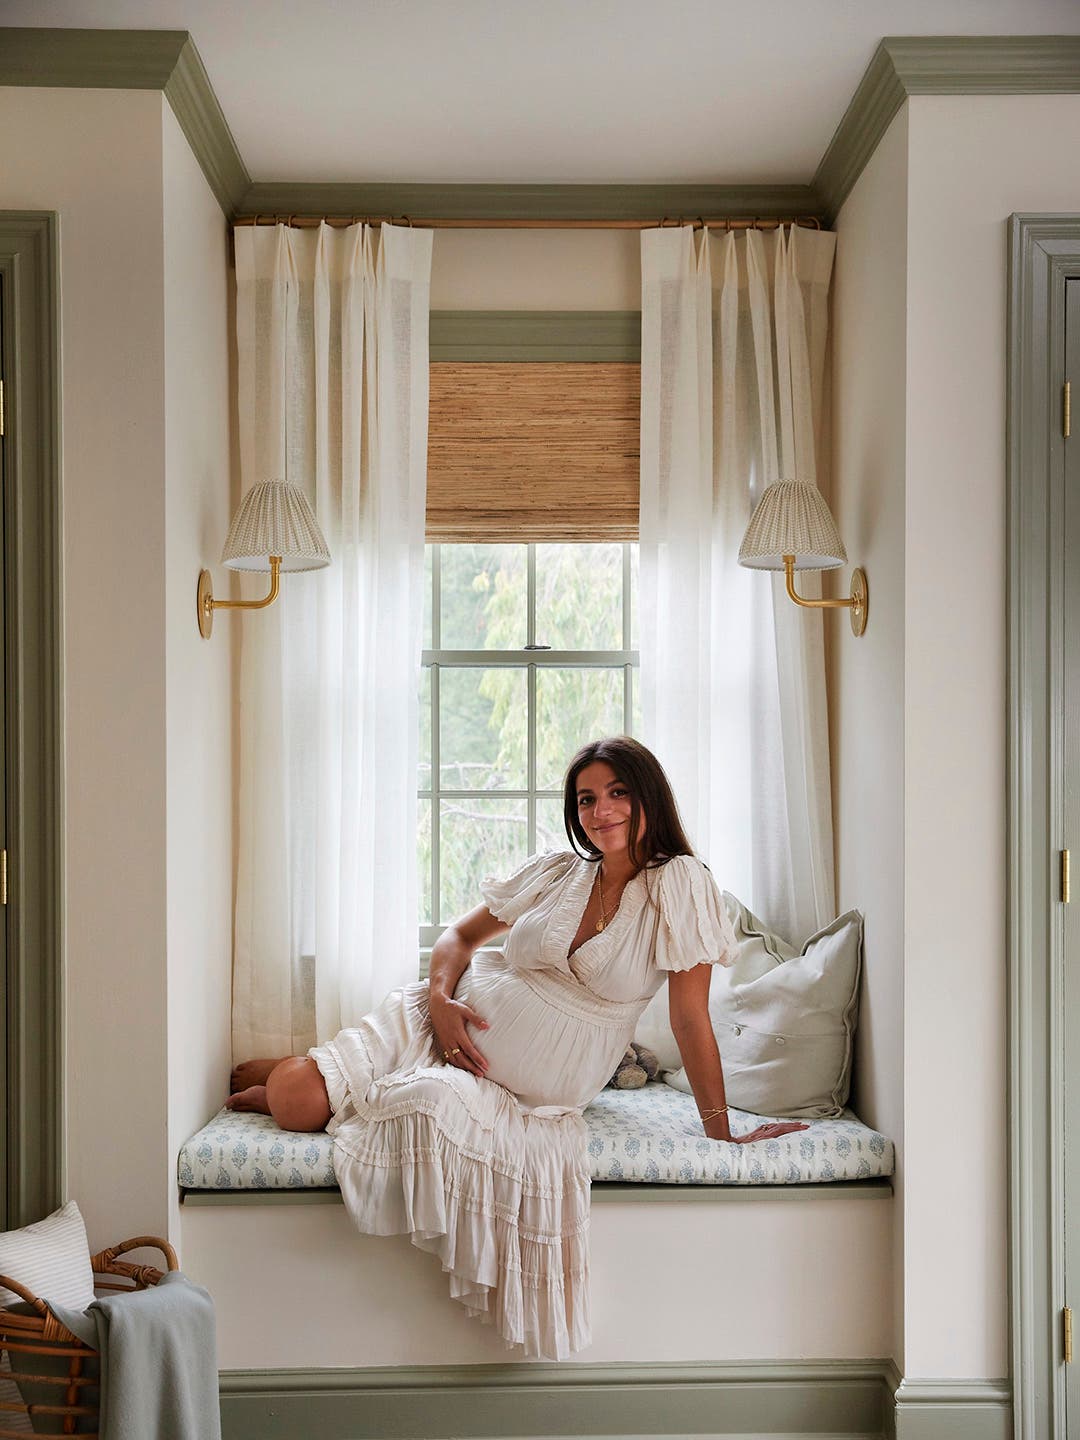 Living in a Rental Didn’t Stop This New Mom From Designing Her Dream Nursery